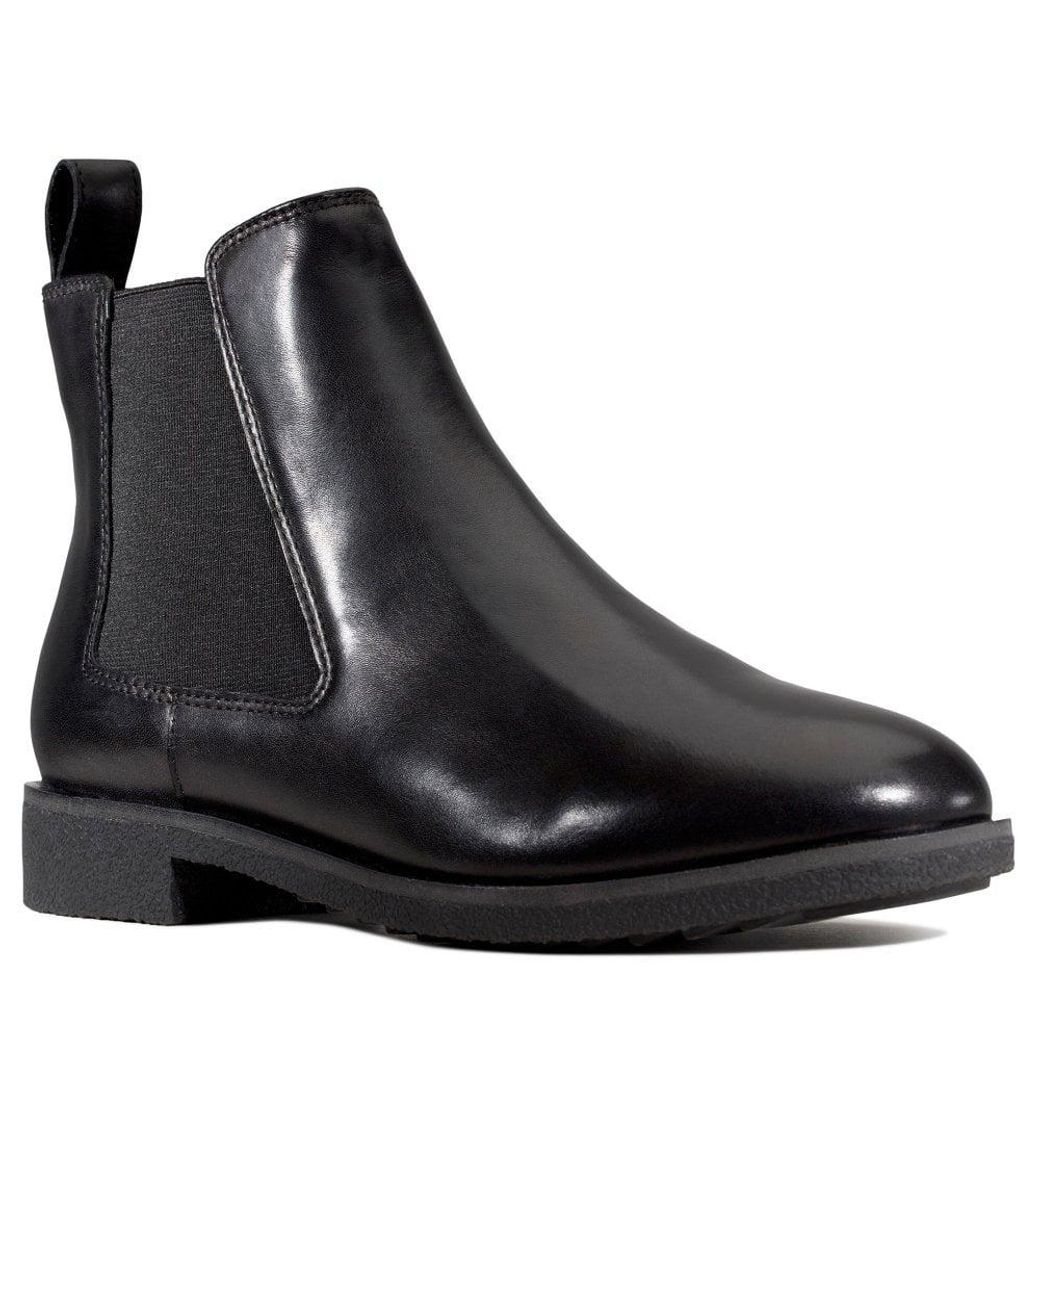 Clarks Leather Griffin Plaza Chelsea Boots in Black | Lyst Australia